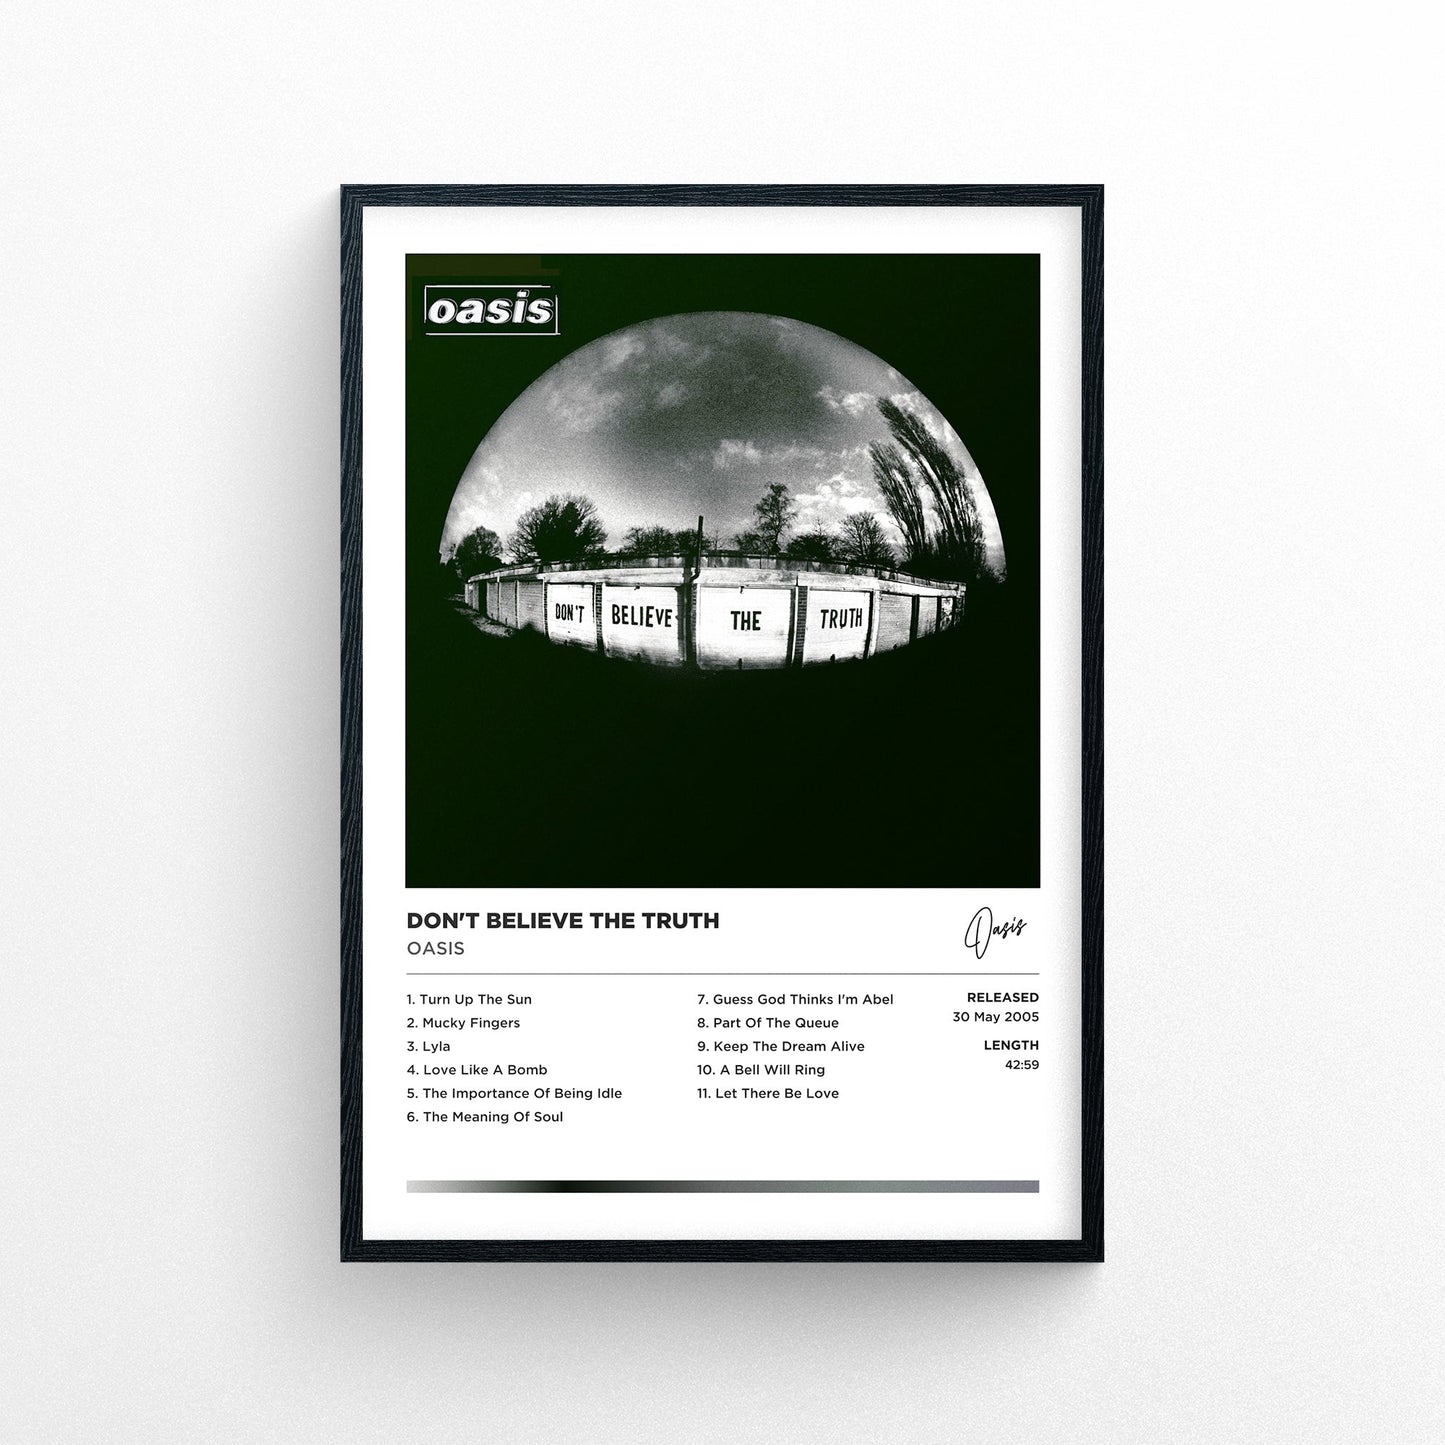 Oasis - Don't Believe The Truth Framed Poster Print | Polaroid Style | Album Cover Artwork